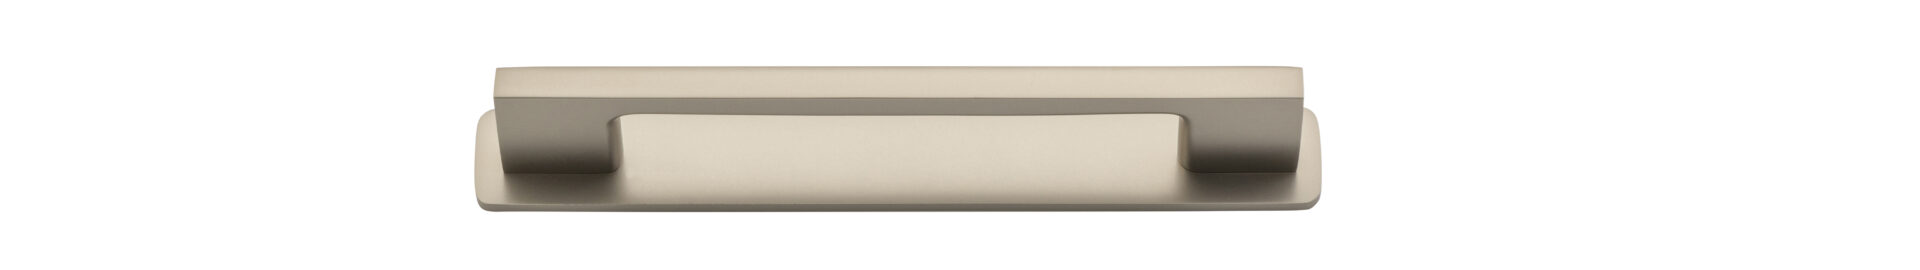 0551B - Cali Cabinet Pull with Backplate - CTC 128mm - Satin Nickel